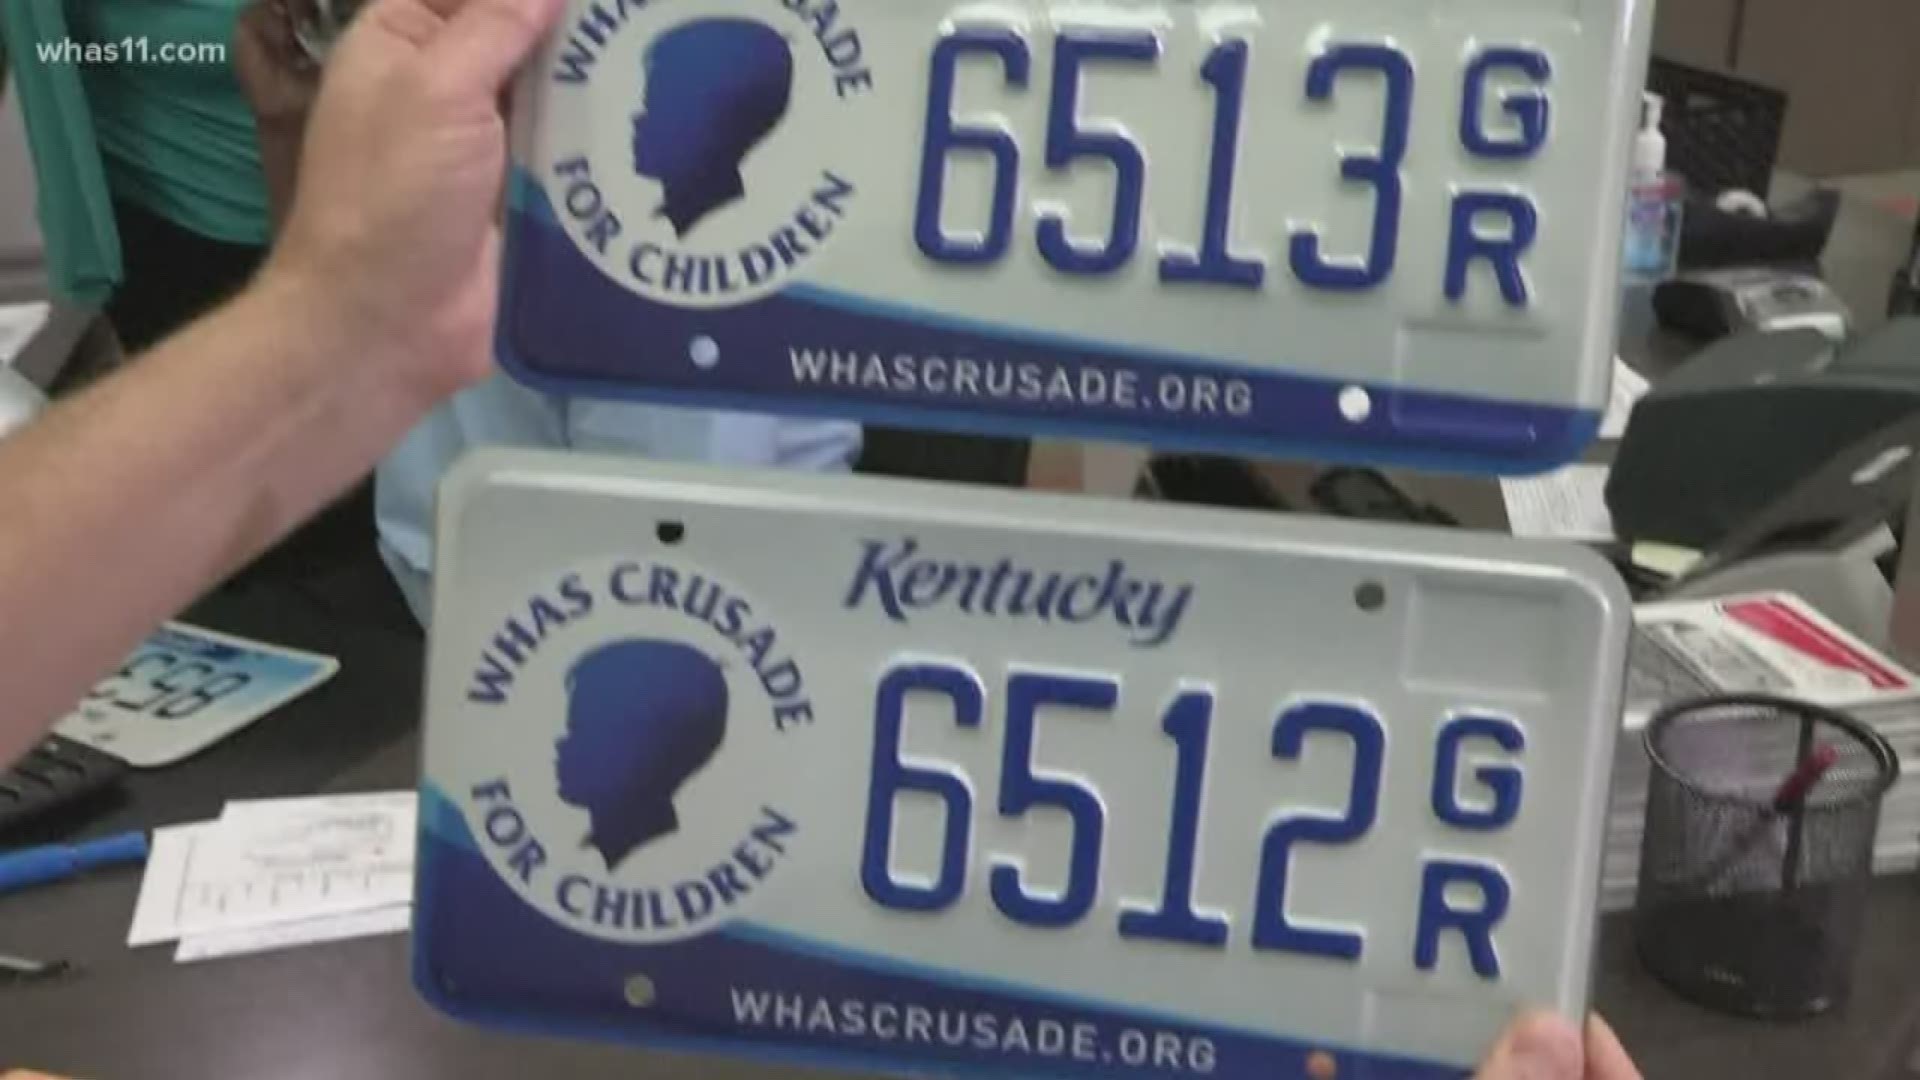 look up license plate owner in kentucky